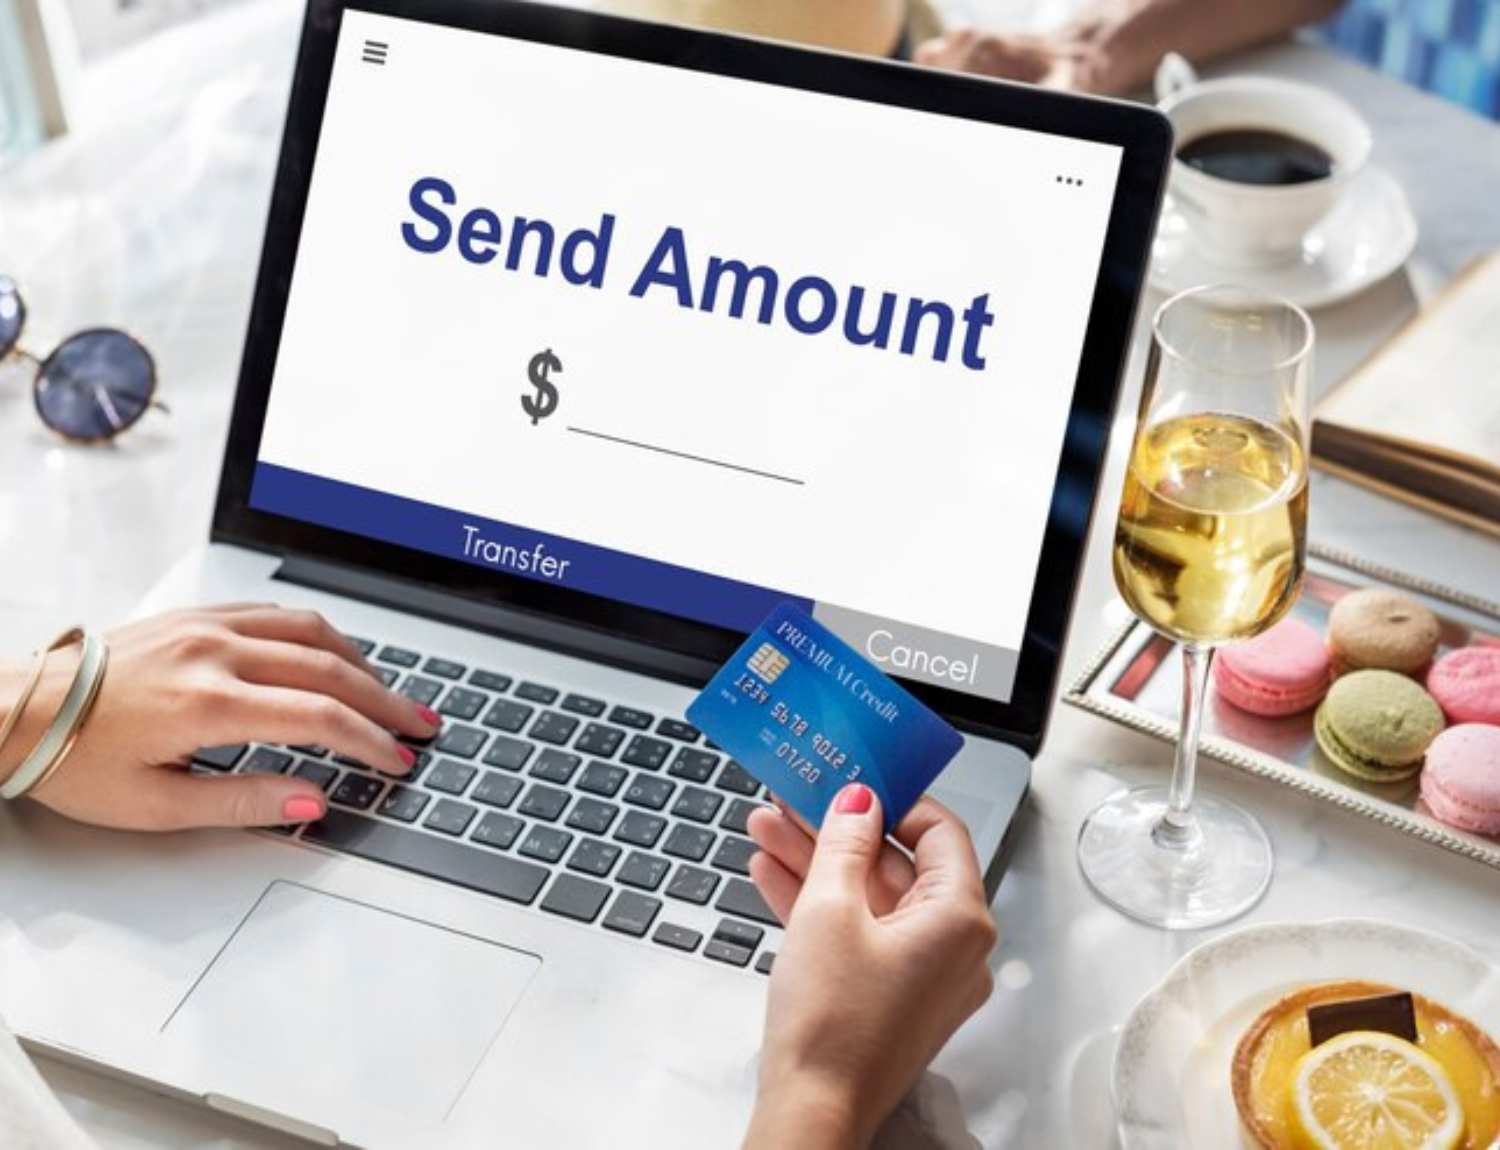 Bank account security tips for online transactions